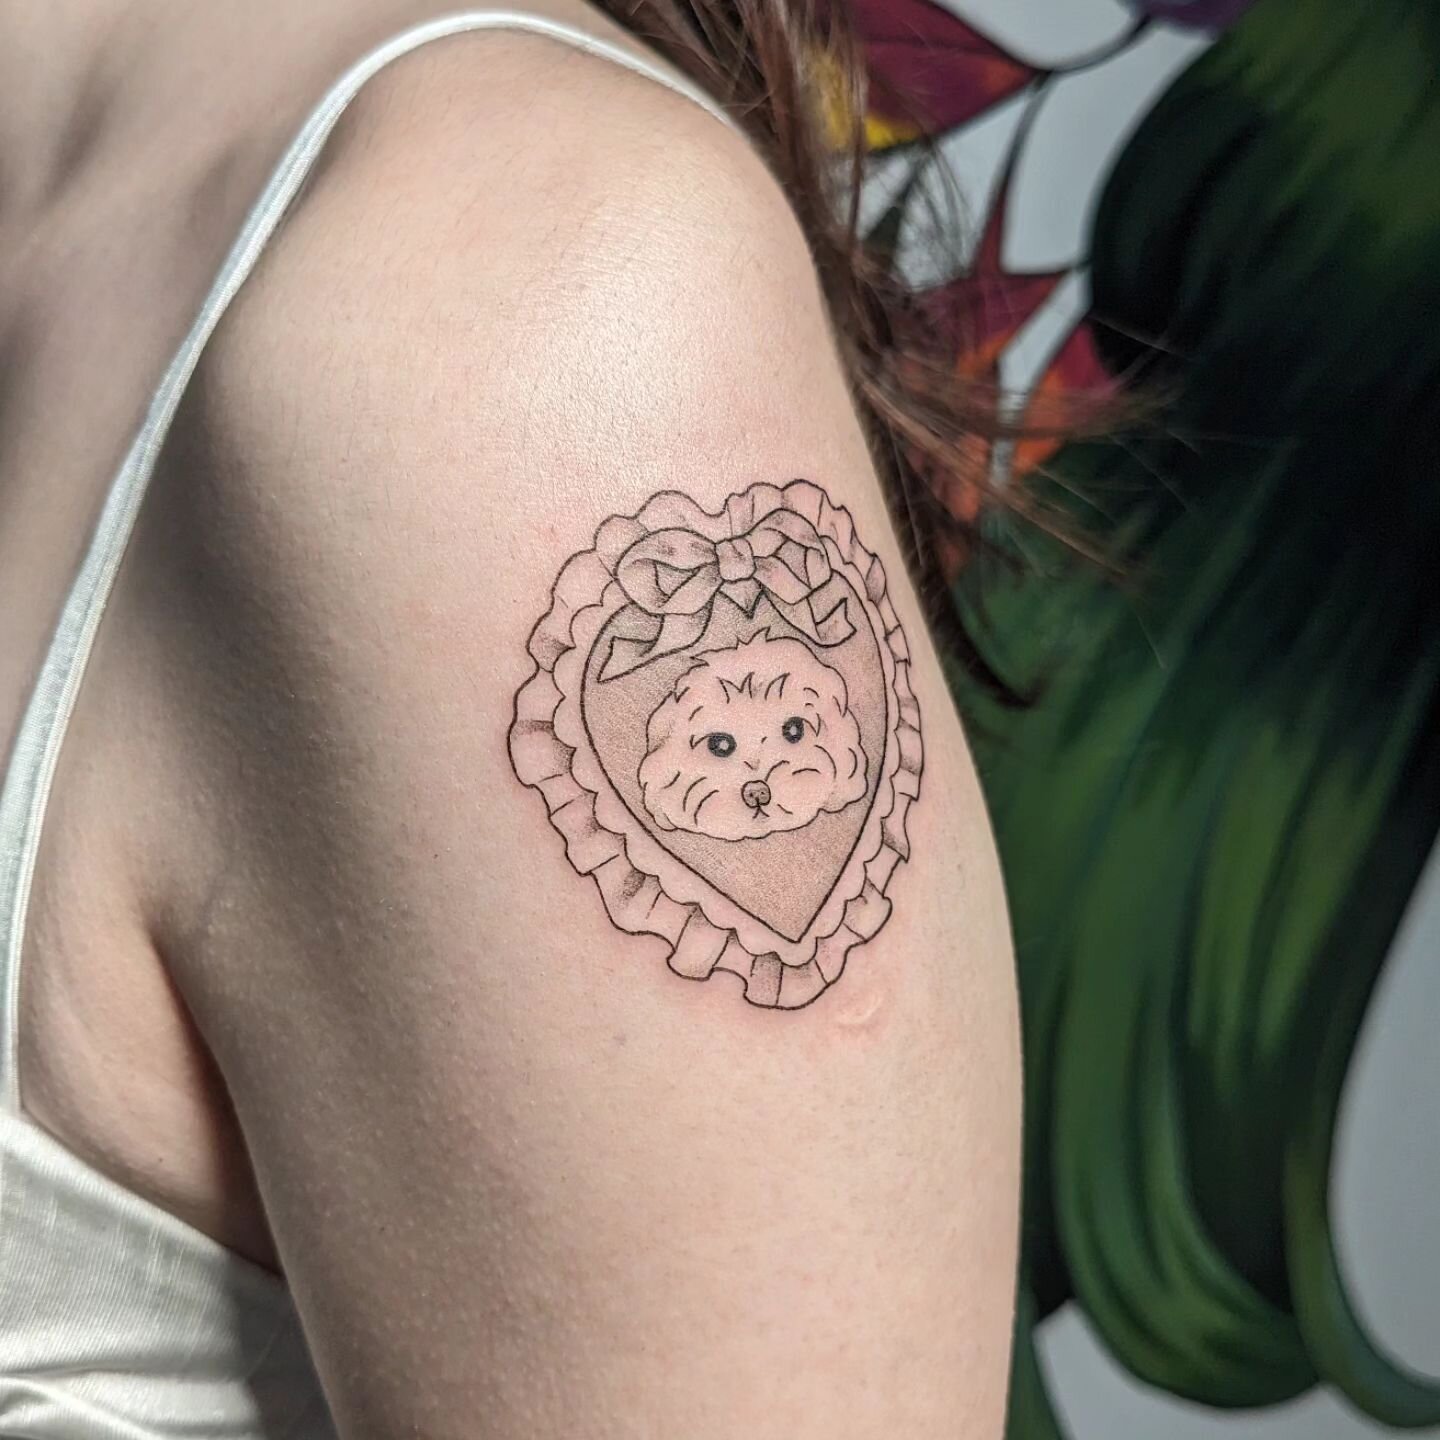 My client drew a portrait of her dog and wanted it incorporated into a heart design 💗

.
.
.
.
.
.

#yyc #yycliving #yyctattoo #tattoo #tattoos #calgary #calgarytattoo #dog #dogtattoo #petportrait #heart #hearttattoo #finelinetattoo #minimaltattoo #